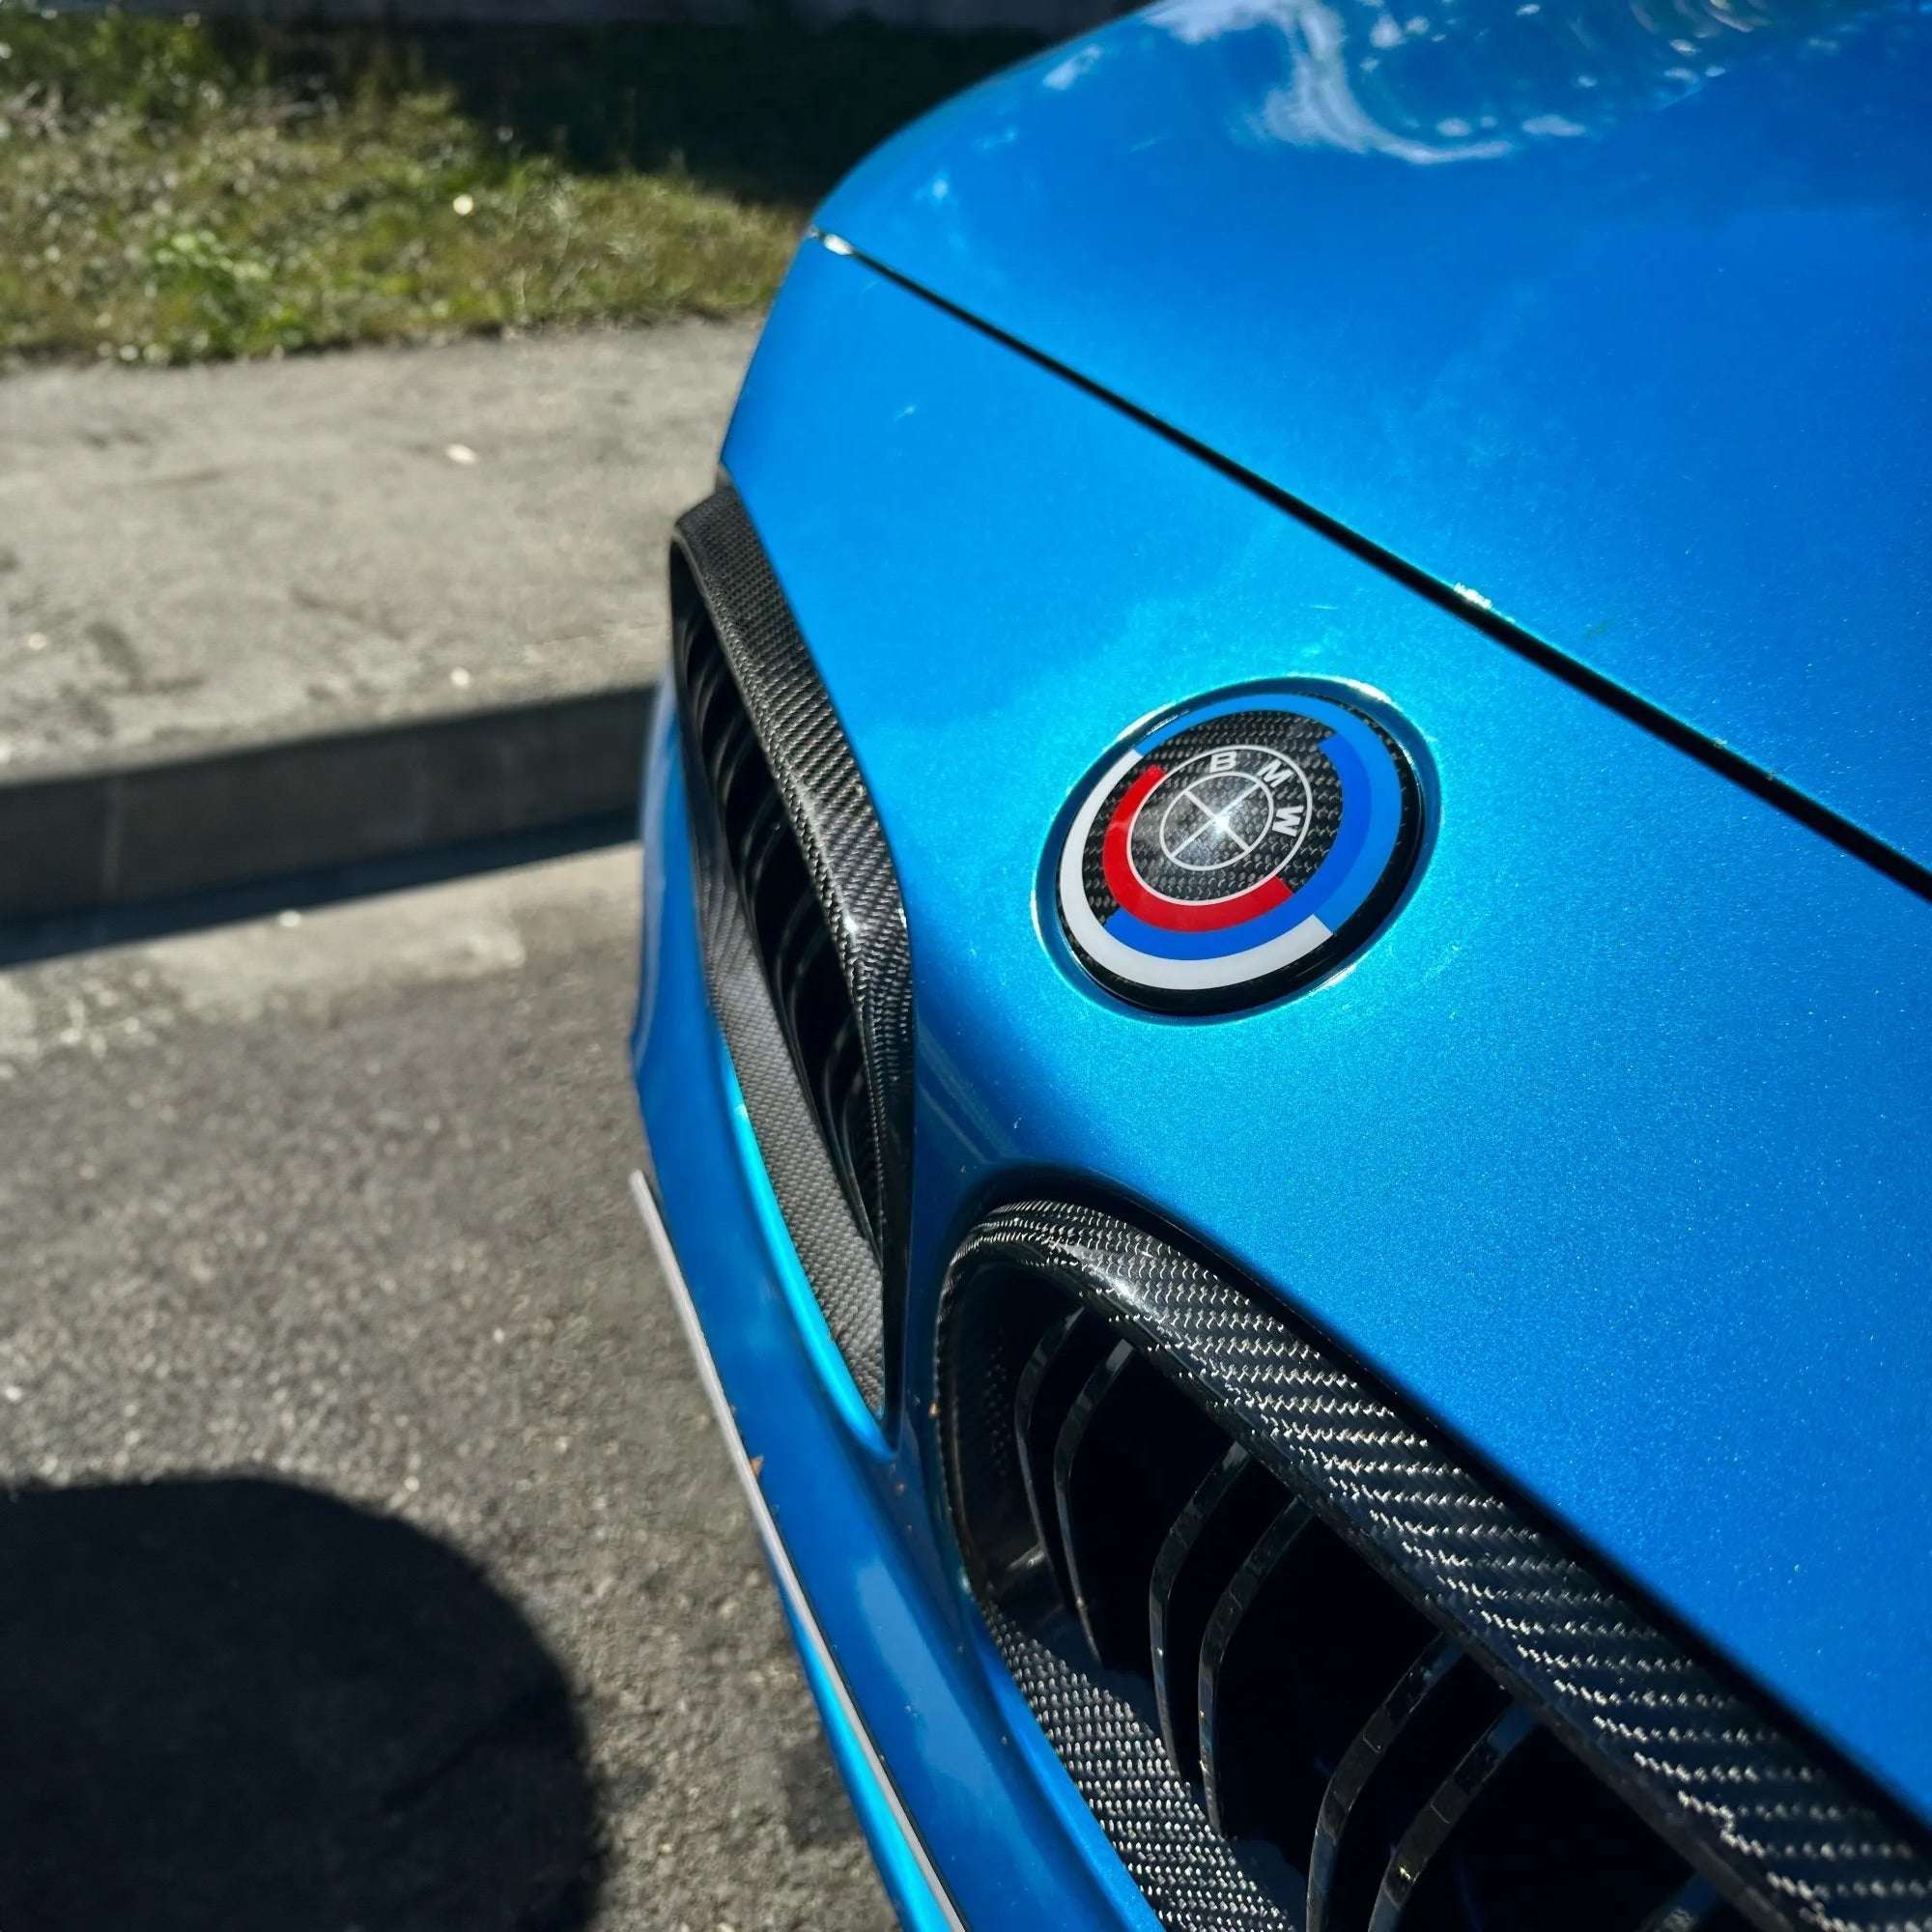 BMW 82MM 74MM 50th Anniversary Emblem, Car Accessories, Accessories on  Carousell